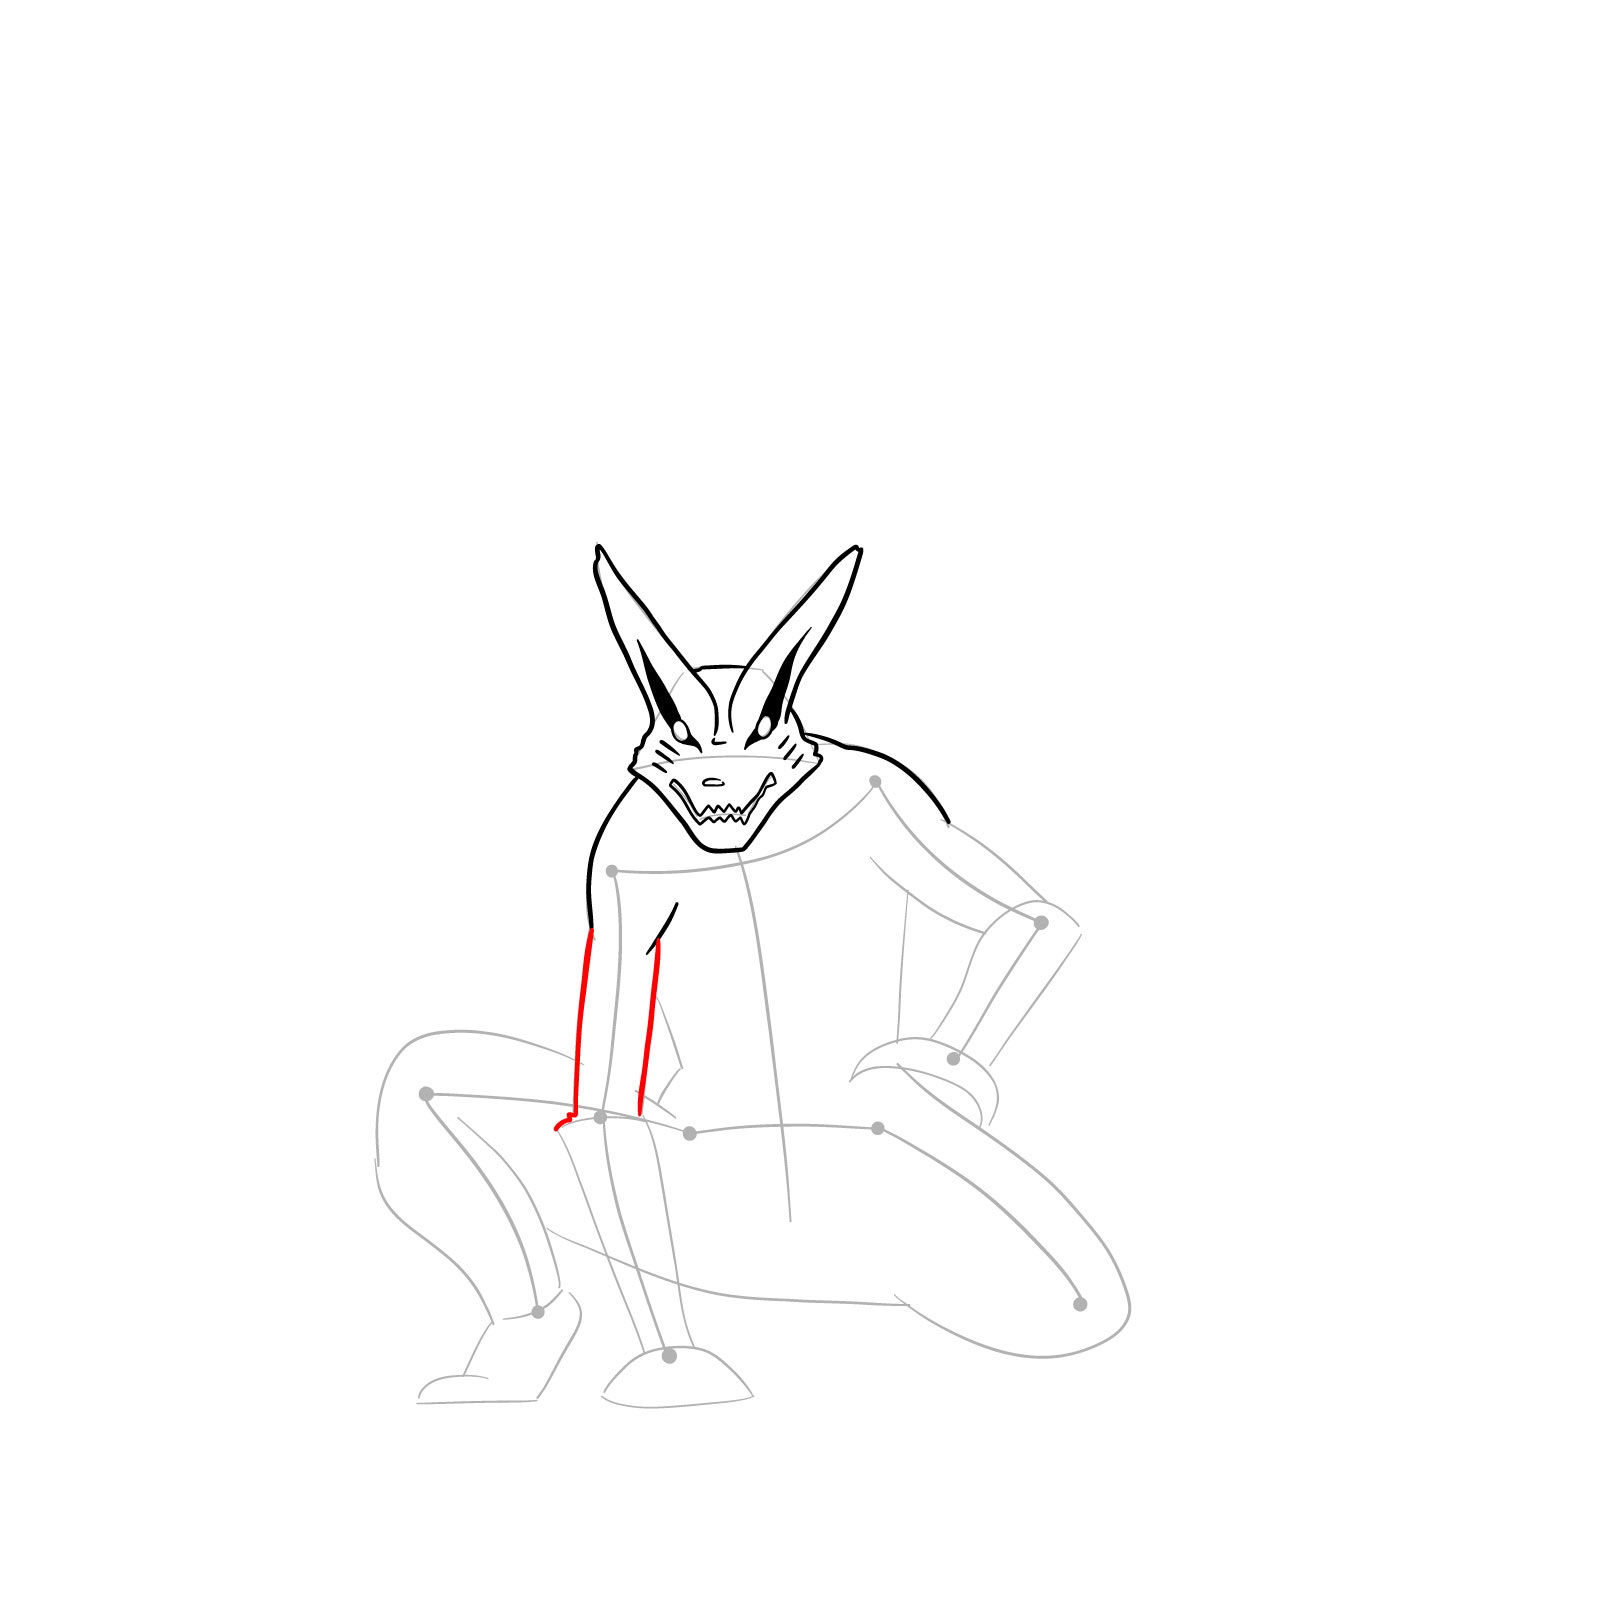 How to Draw Naruto's Tailed Beast Mode - step 12